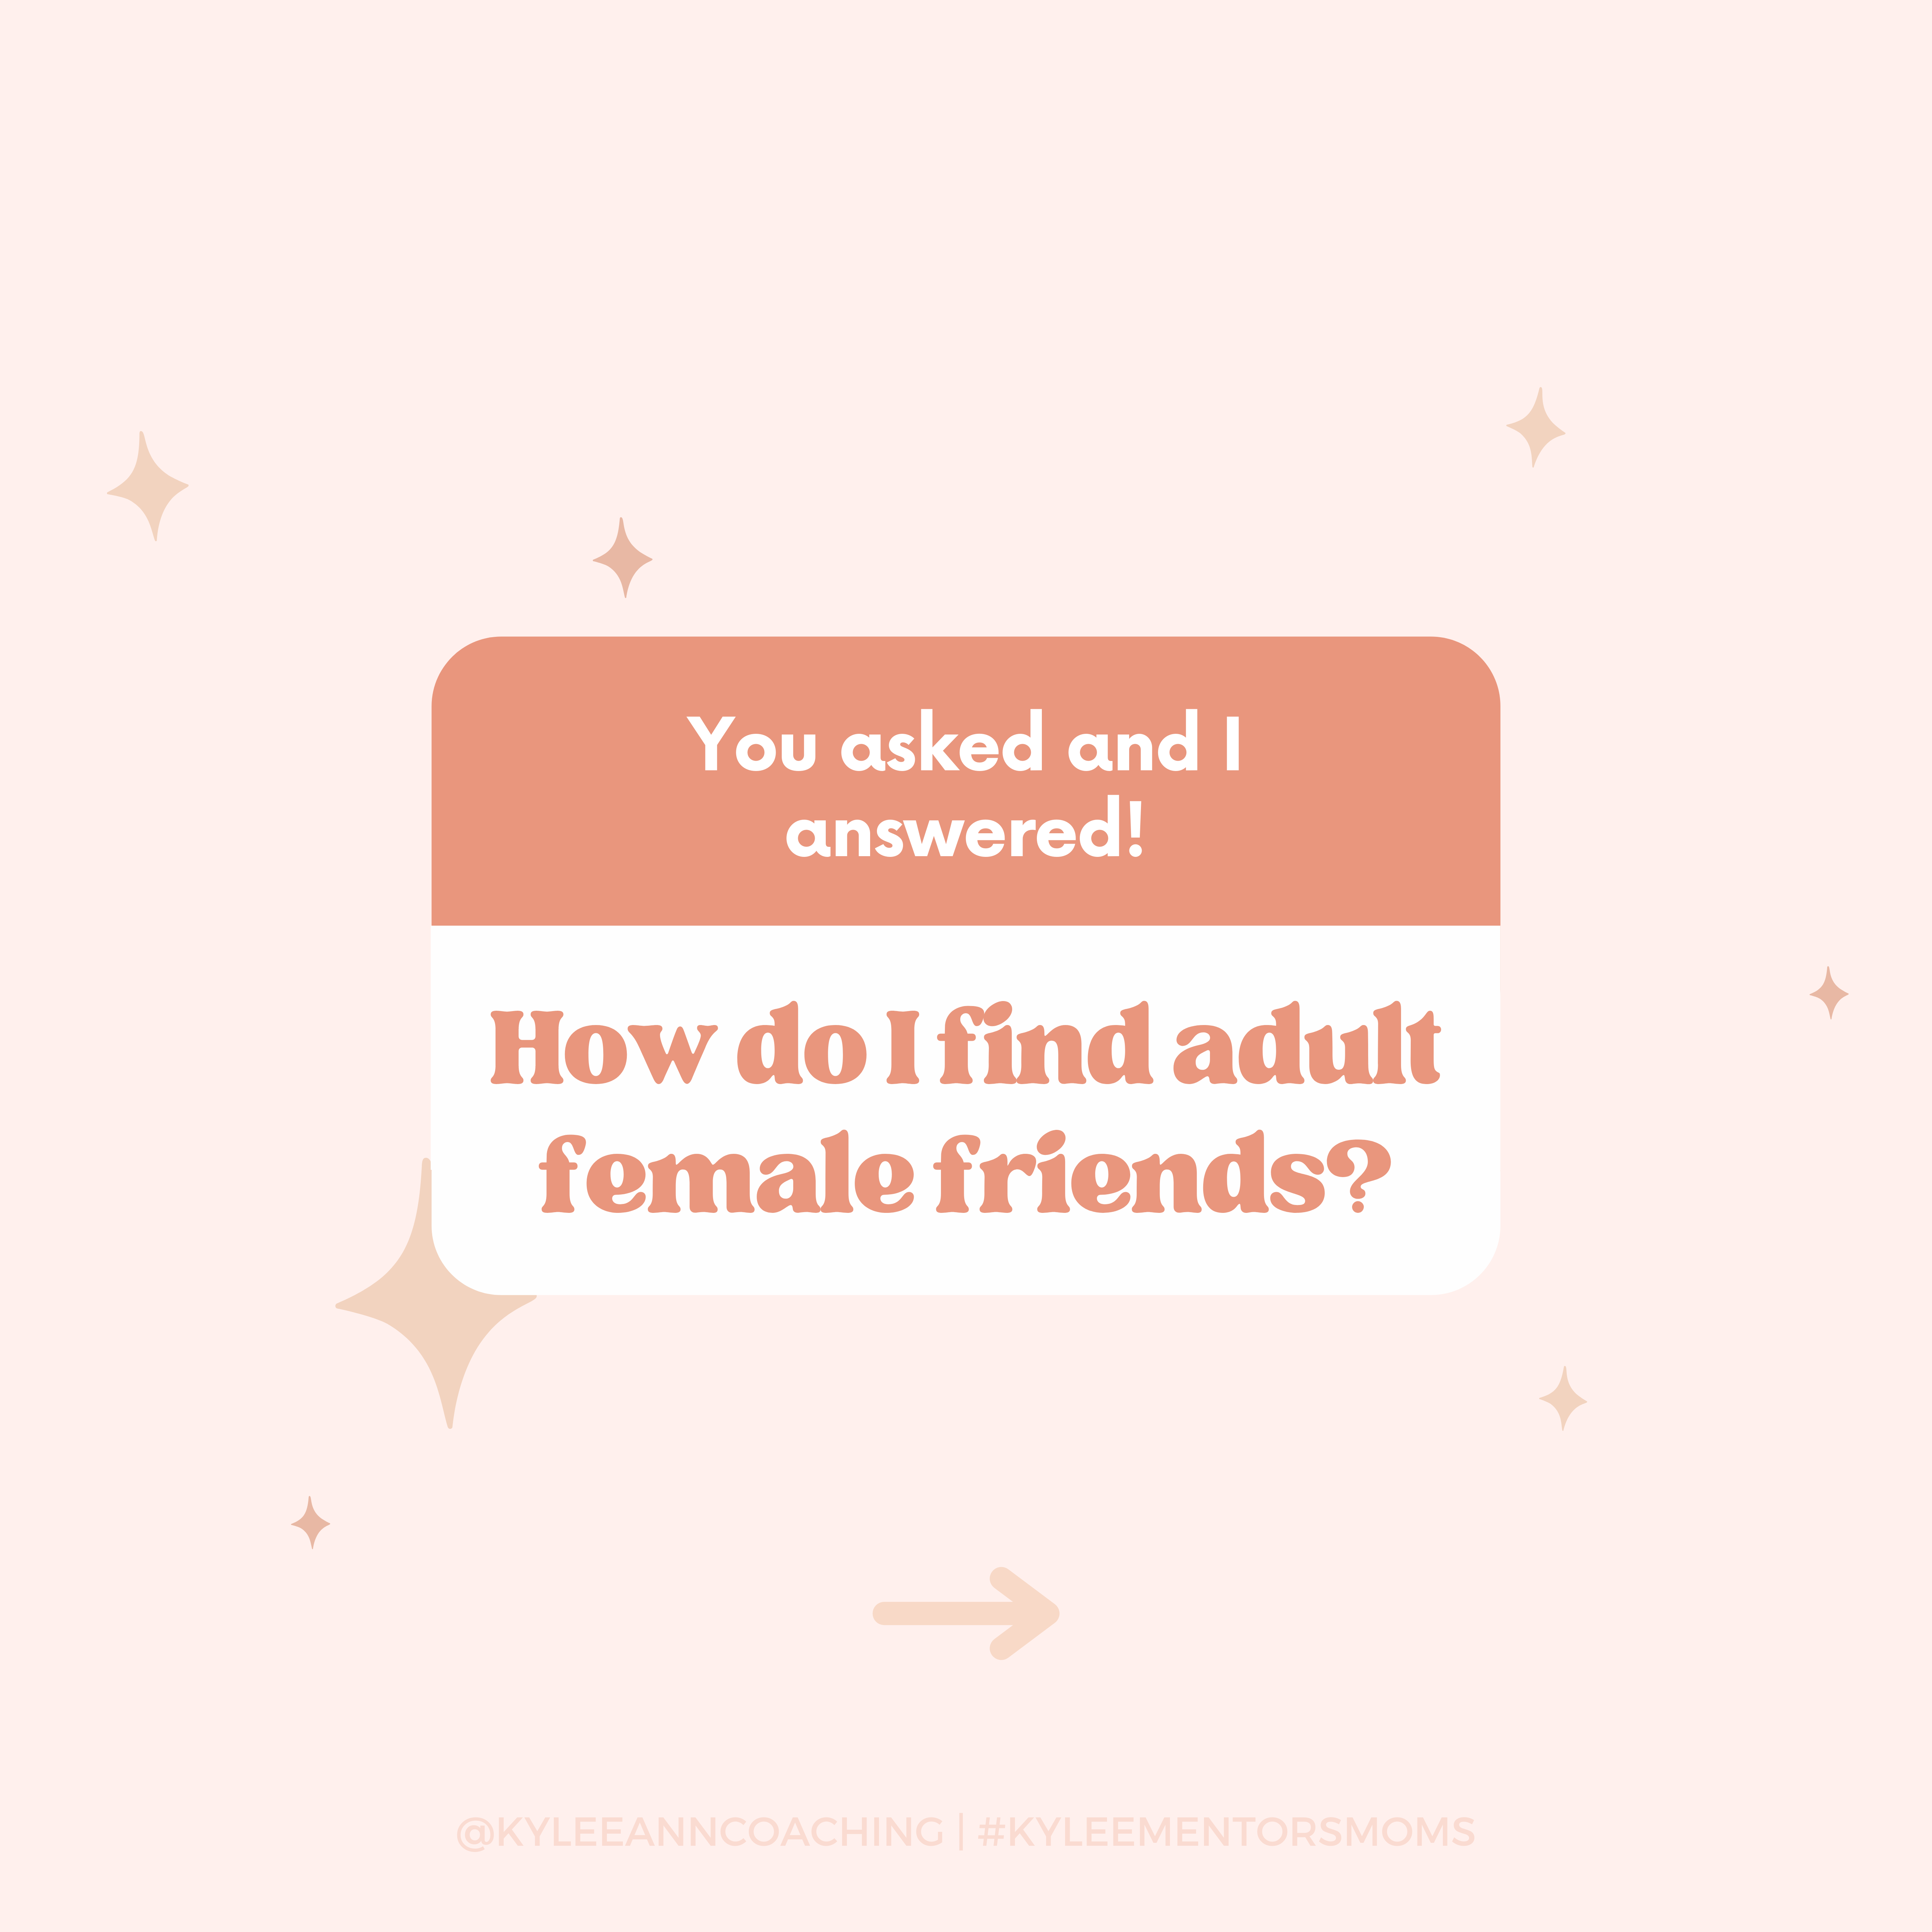 Making Friends as an Adult